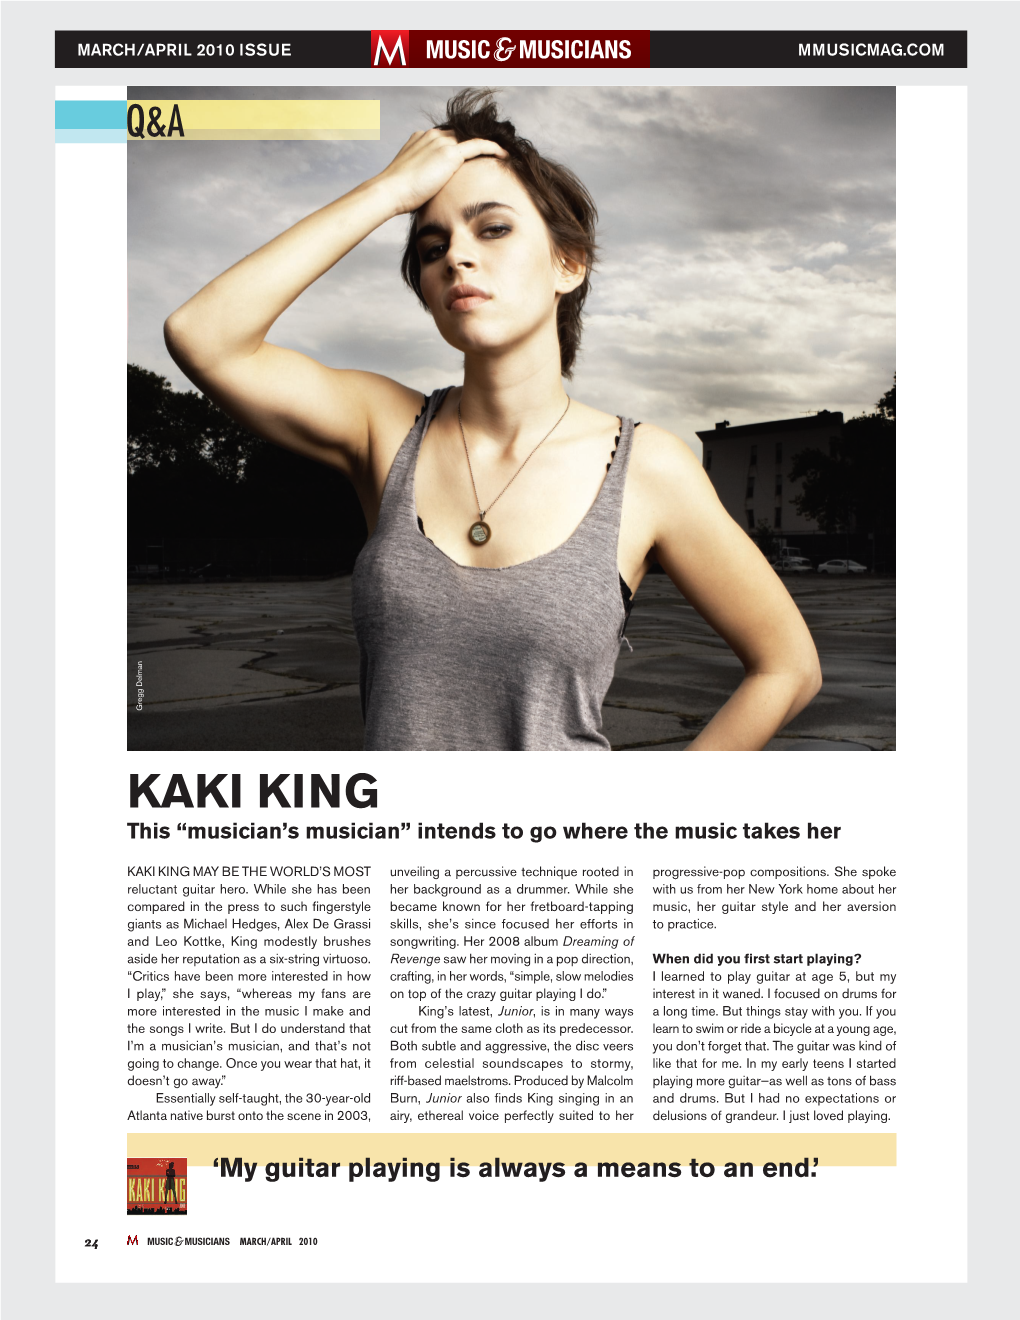 KAKI KING This “Musician’S Musician” Intends to Go Where the Music Takes Her